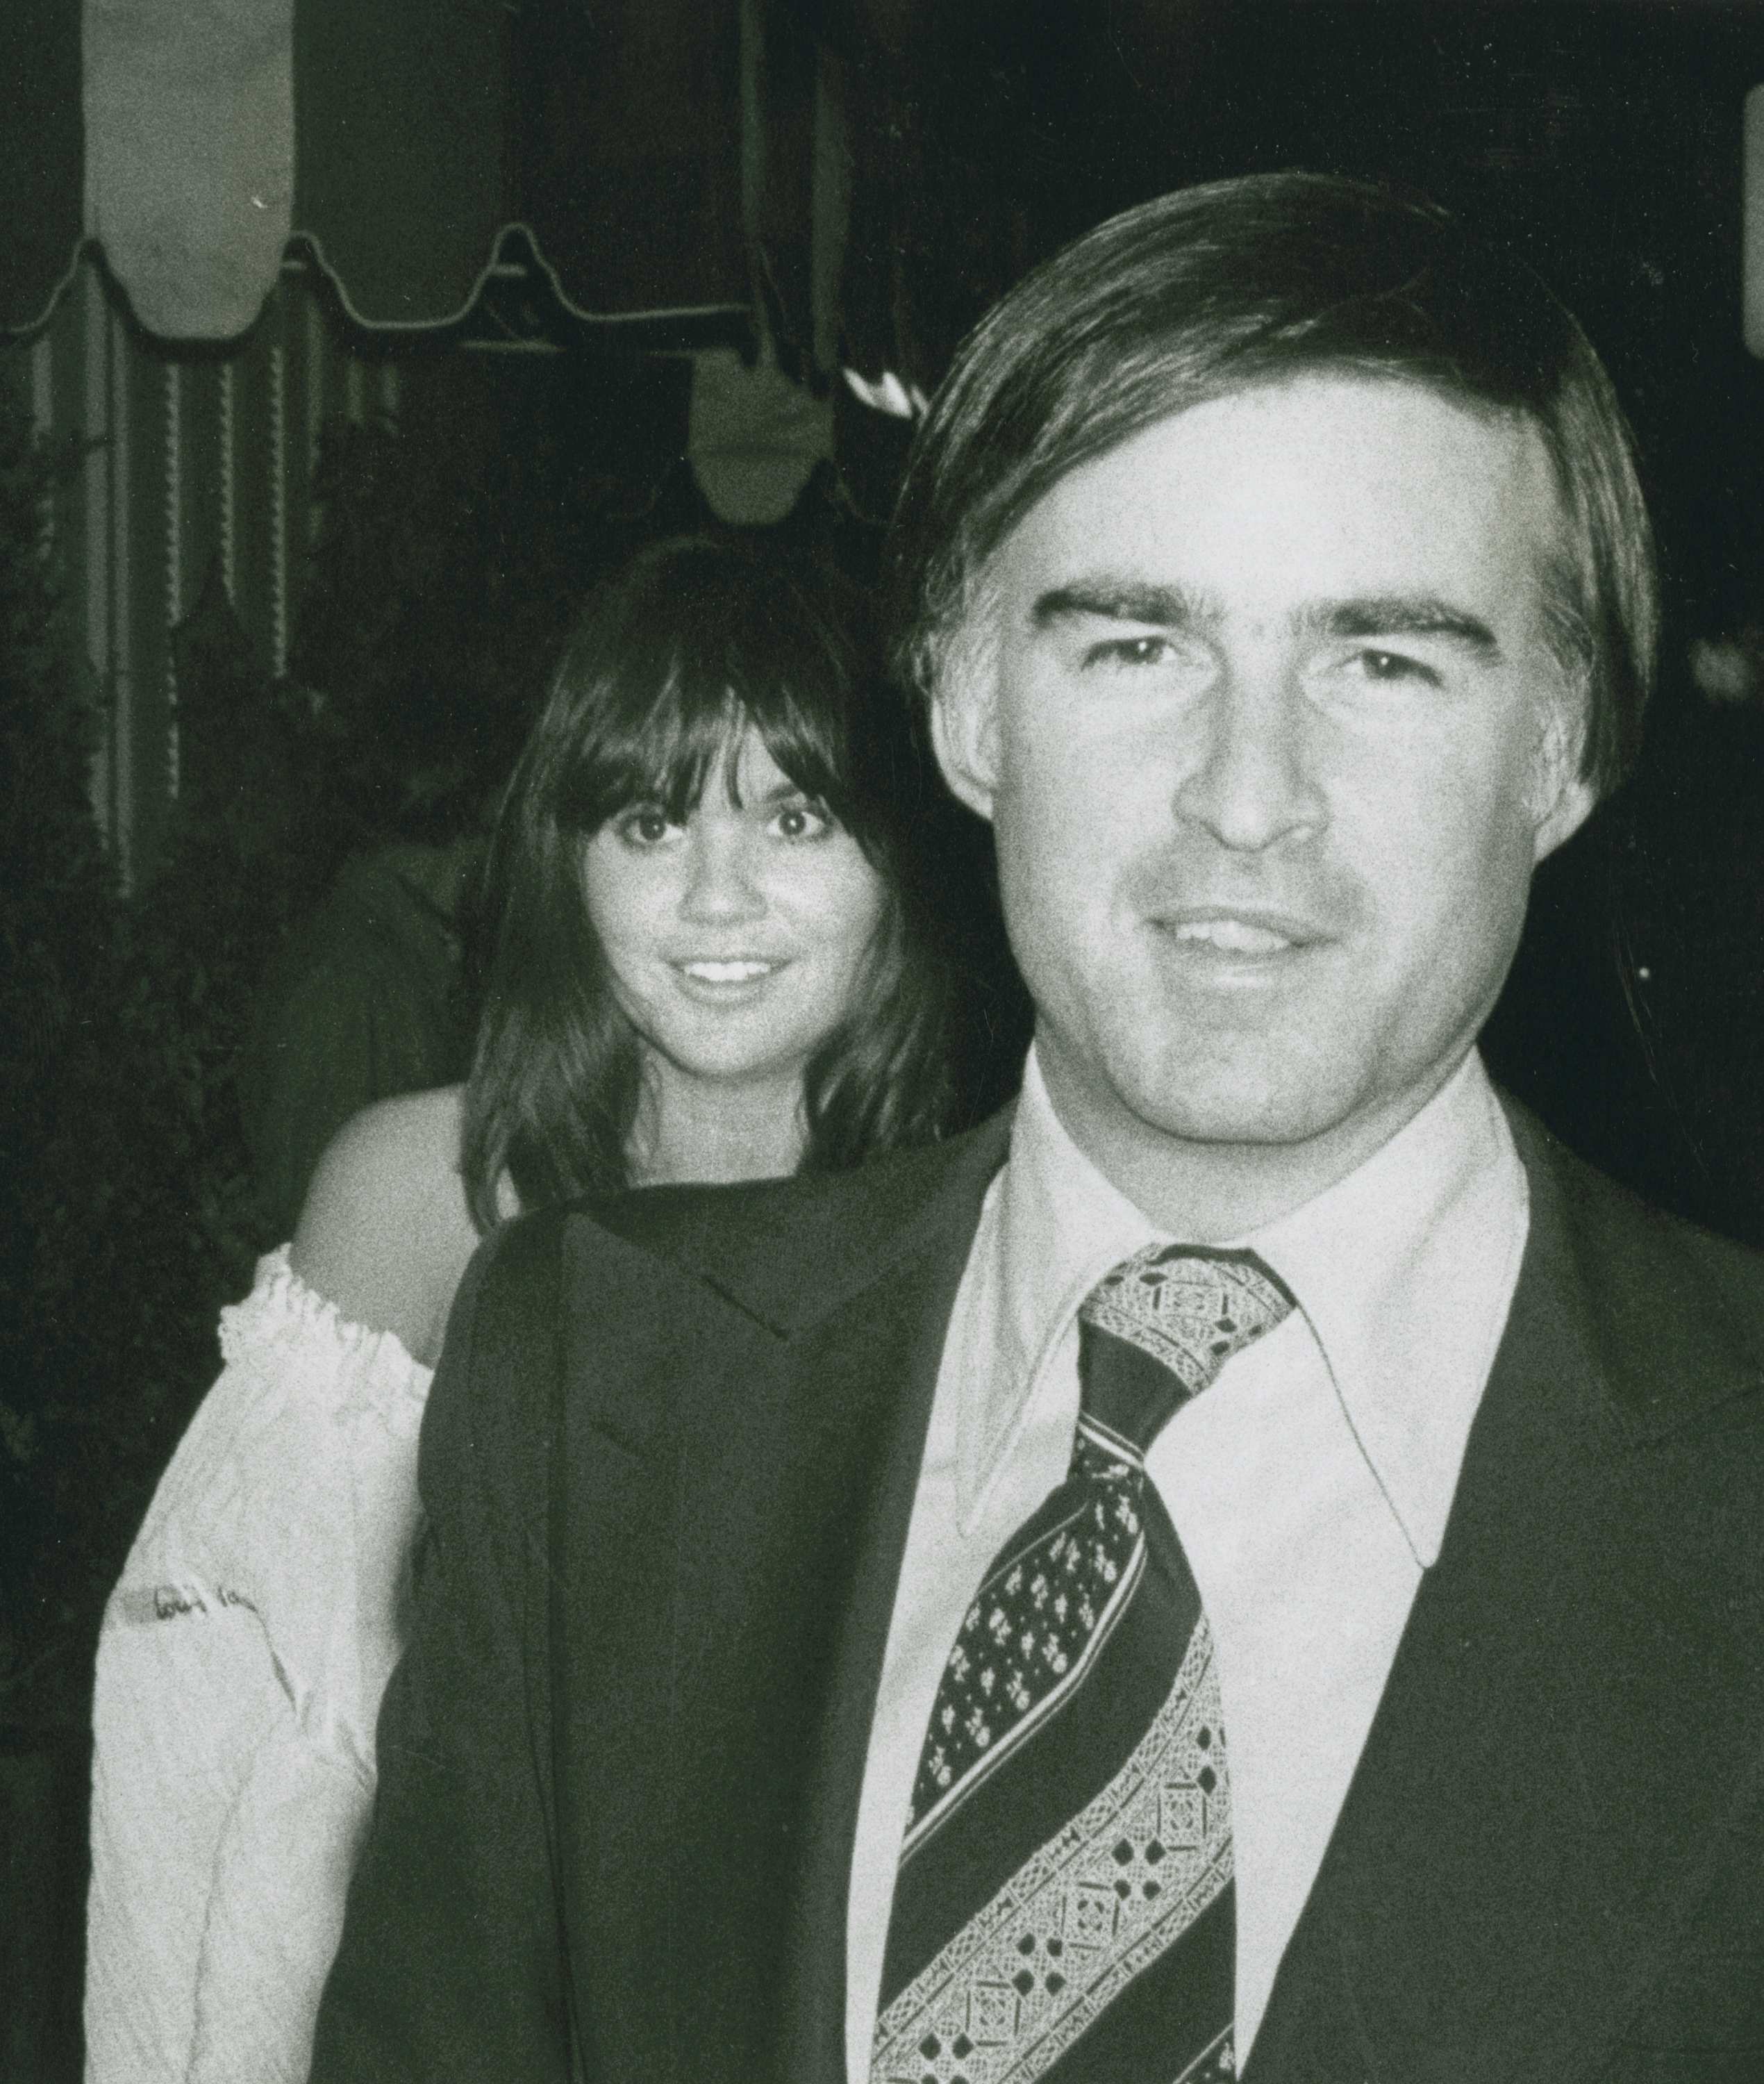 Governor Jerry Brown and singer Linda Ronstadt photographed on March 7, 1977, at Dantana Restaurant in Los Angeles, California | Source: Getty Images